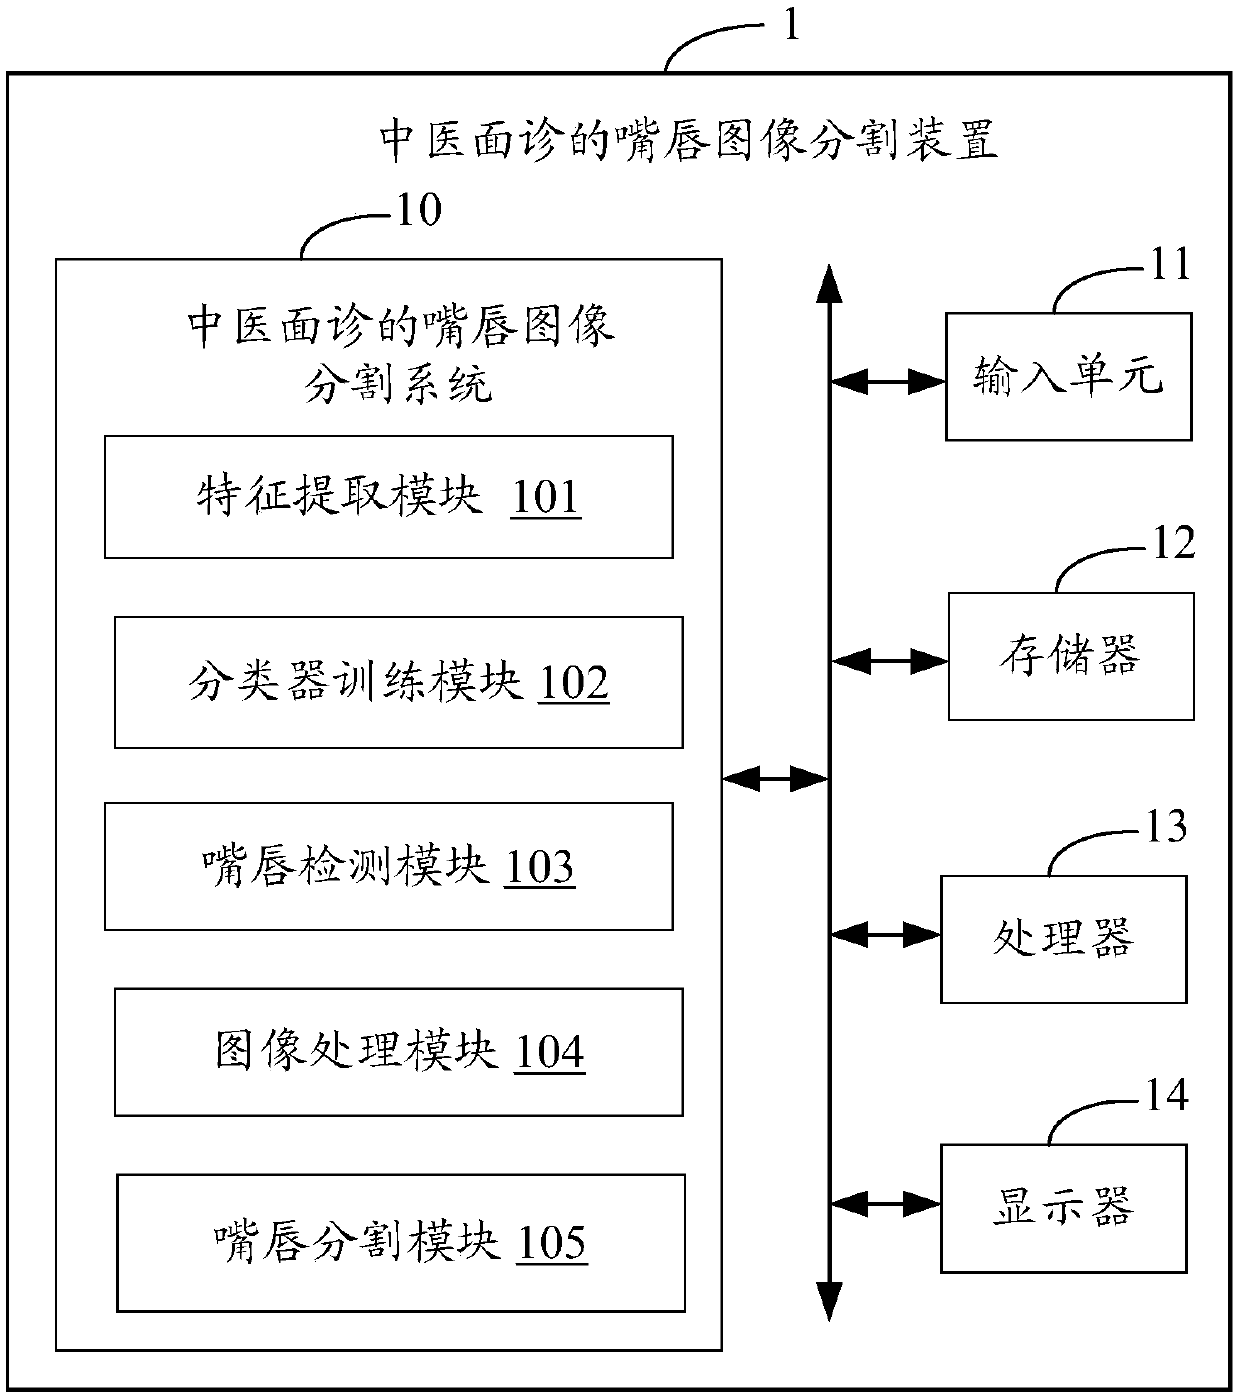 Lip image segmentation device and method for traditional Chinese medicine face diagnosis